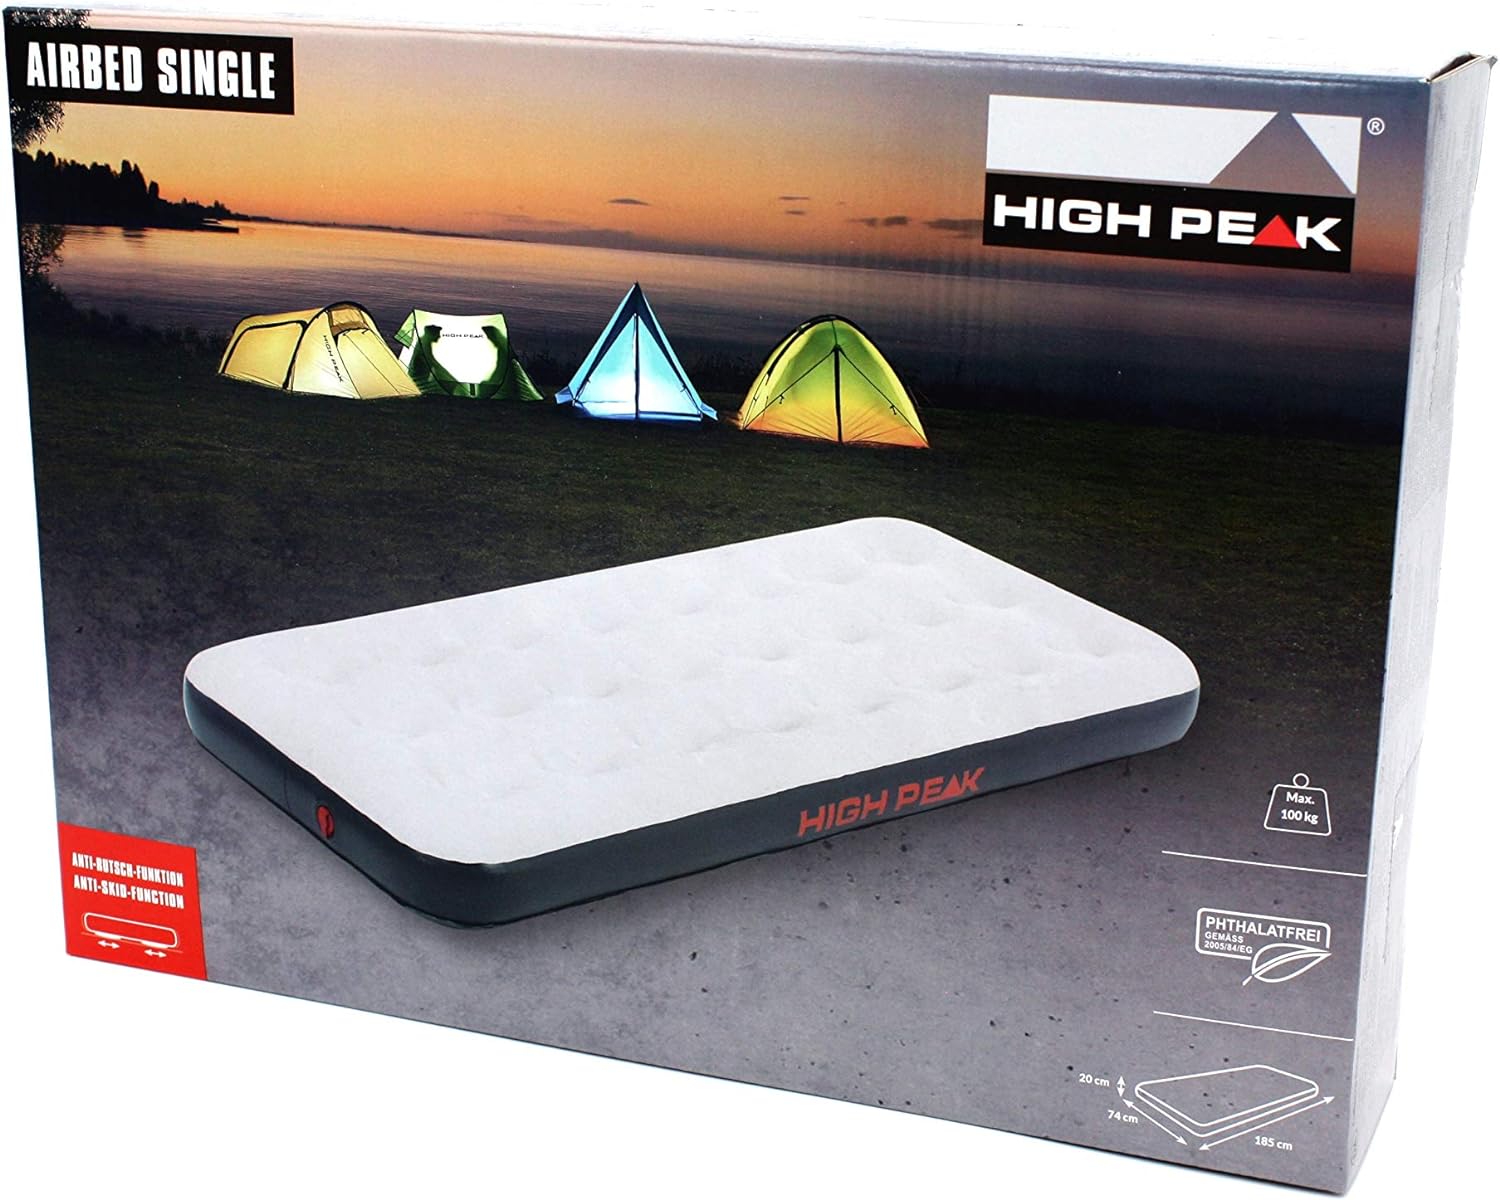 High Peak Camping Air Bed/Guest Bed